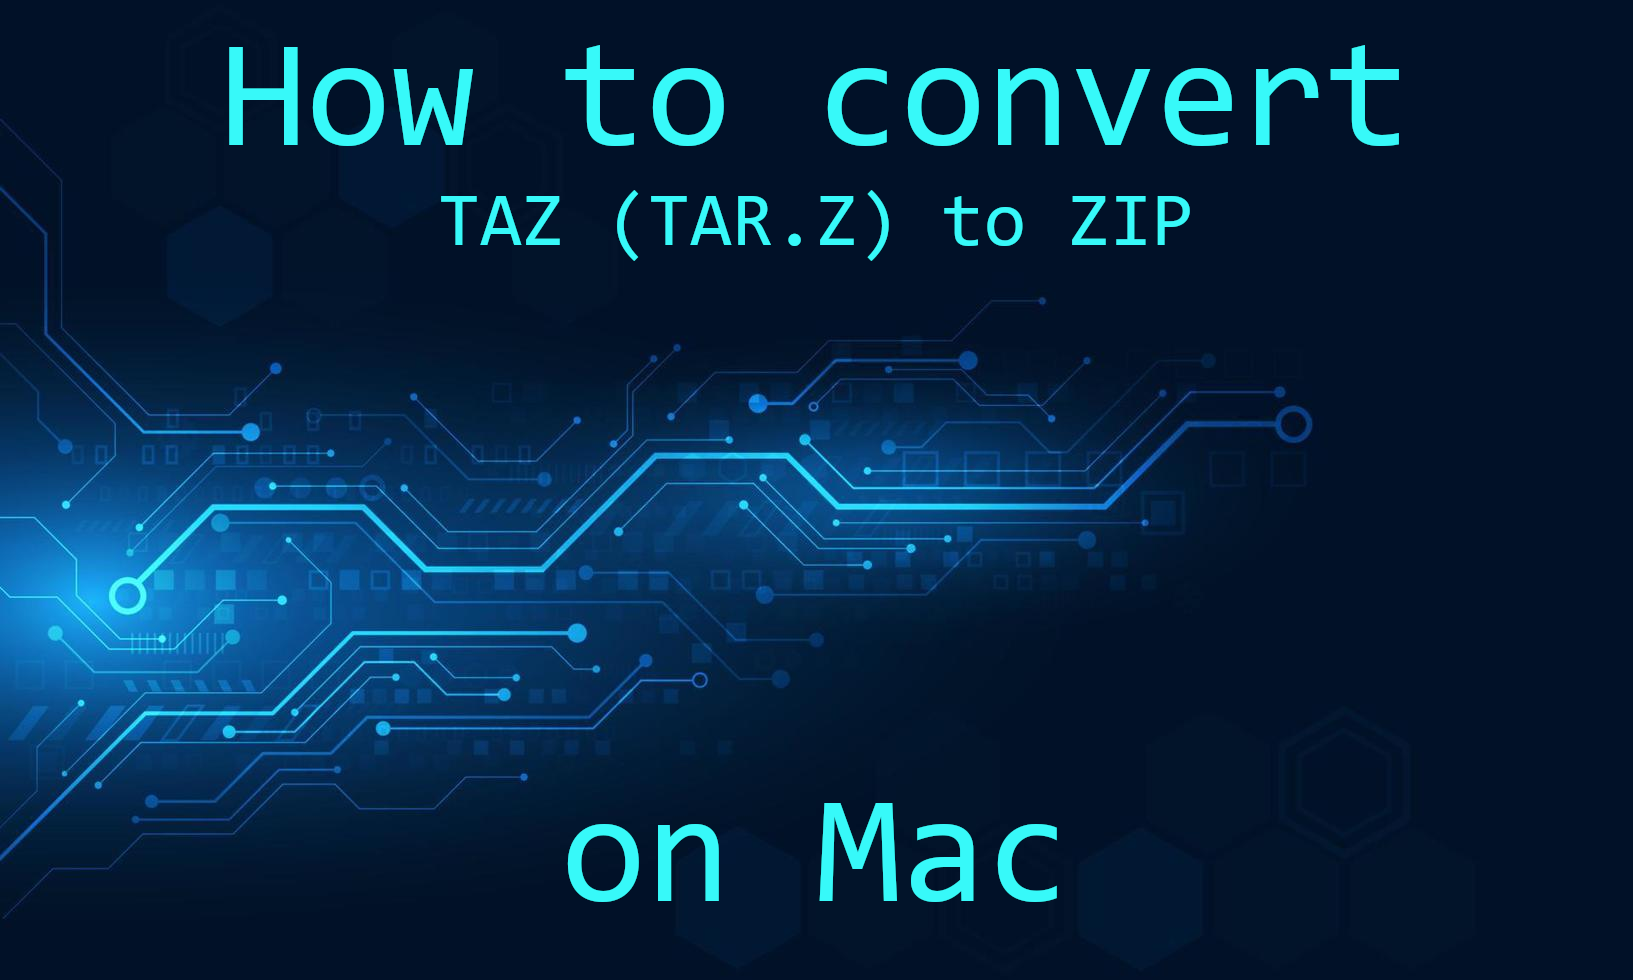 how to convert taz to zip on mac, how to convert tz to zip on mac, how to convert tar.z to zip on mac